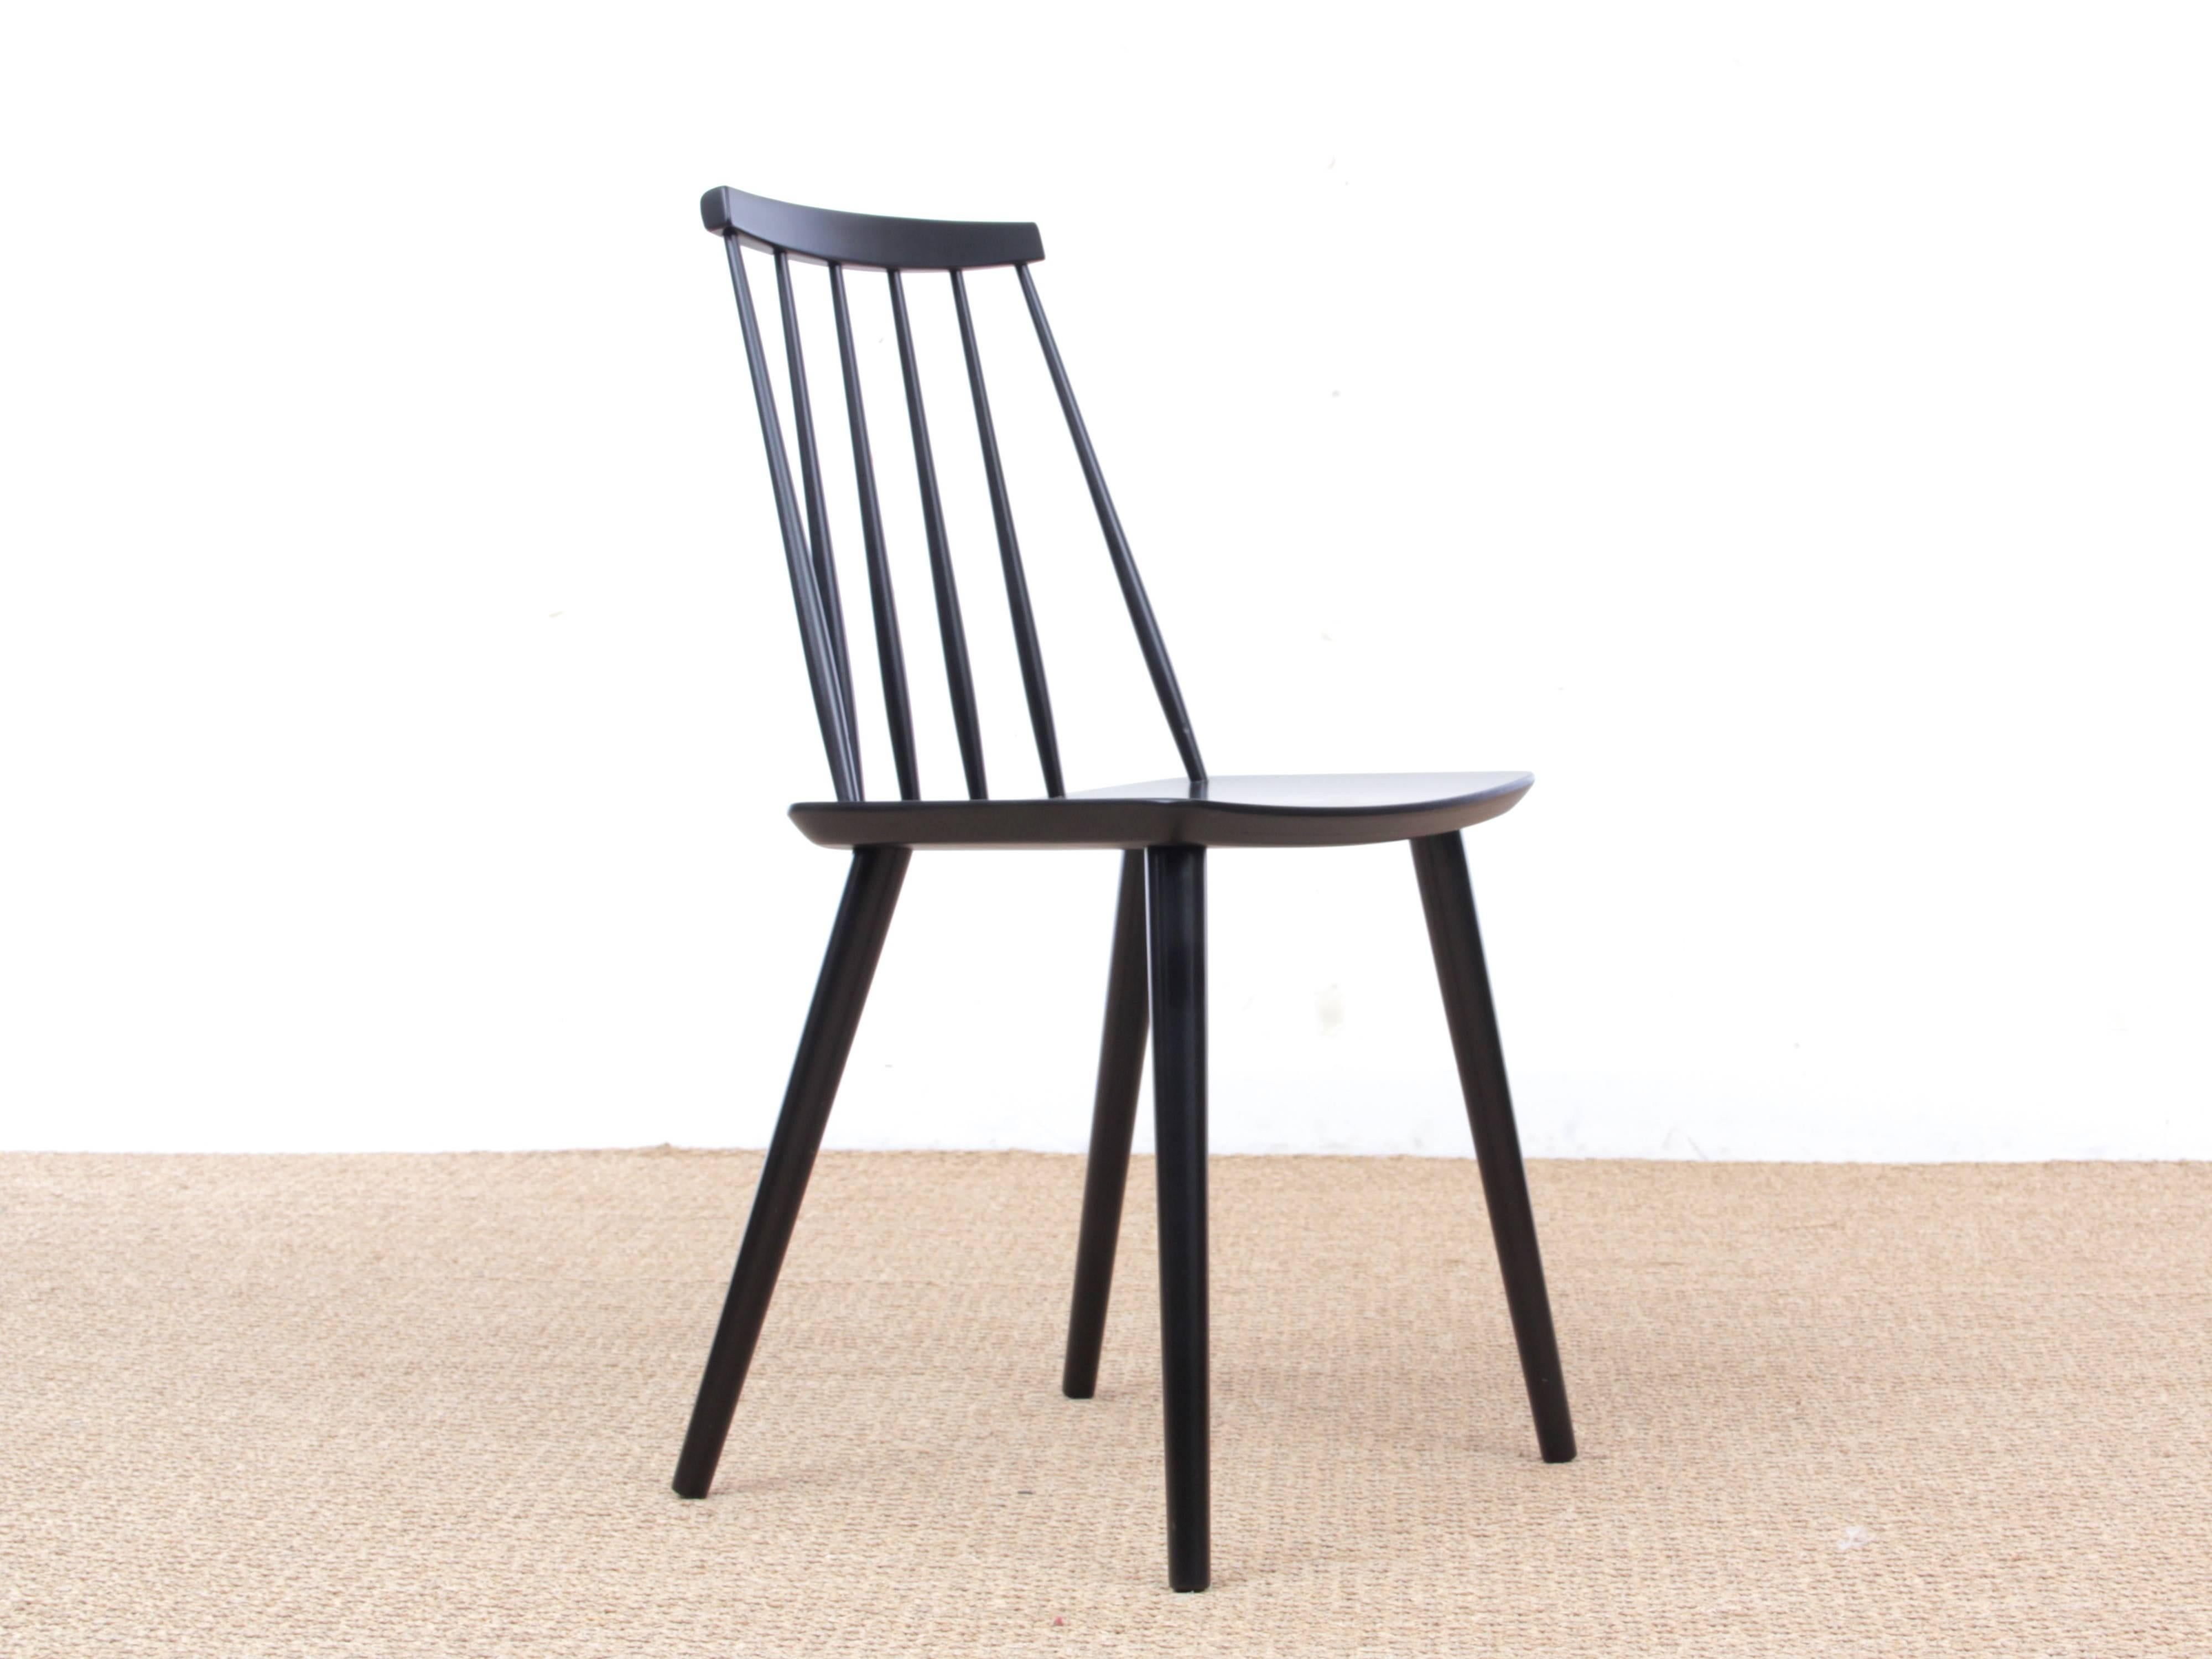 Mid-Century Modern Scandinavian Stick Back chair by Thomas Harlev, black stain beech. New edition.
Architect Thomas Harlev belonged to a group of Danish furniture designers, who designed exclusive and functional quality furniture for the “people”